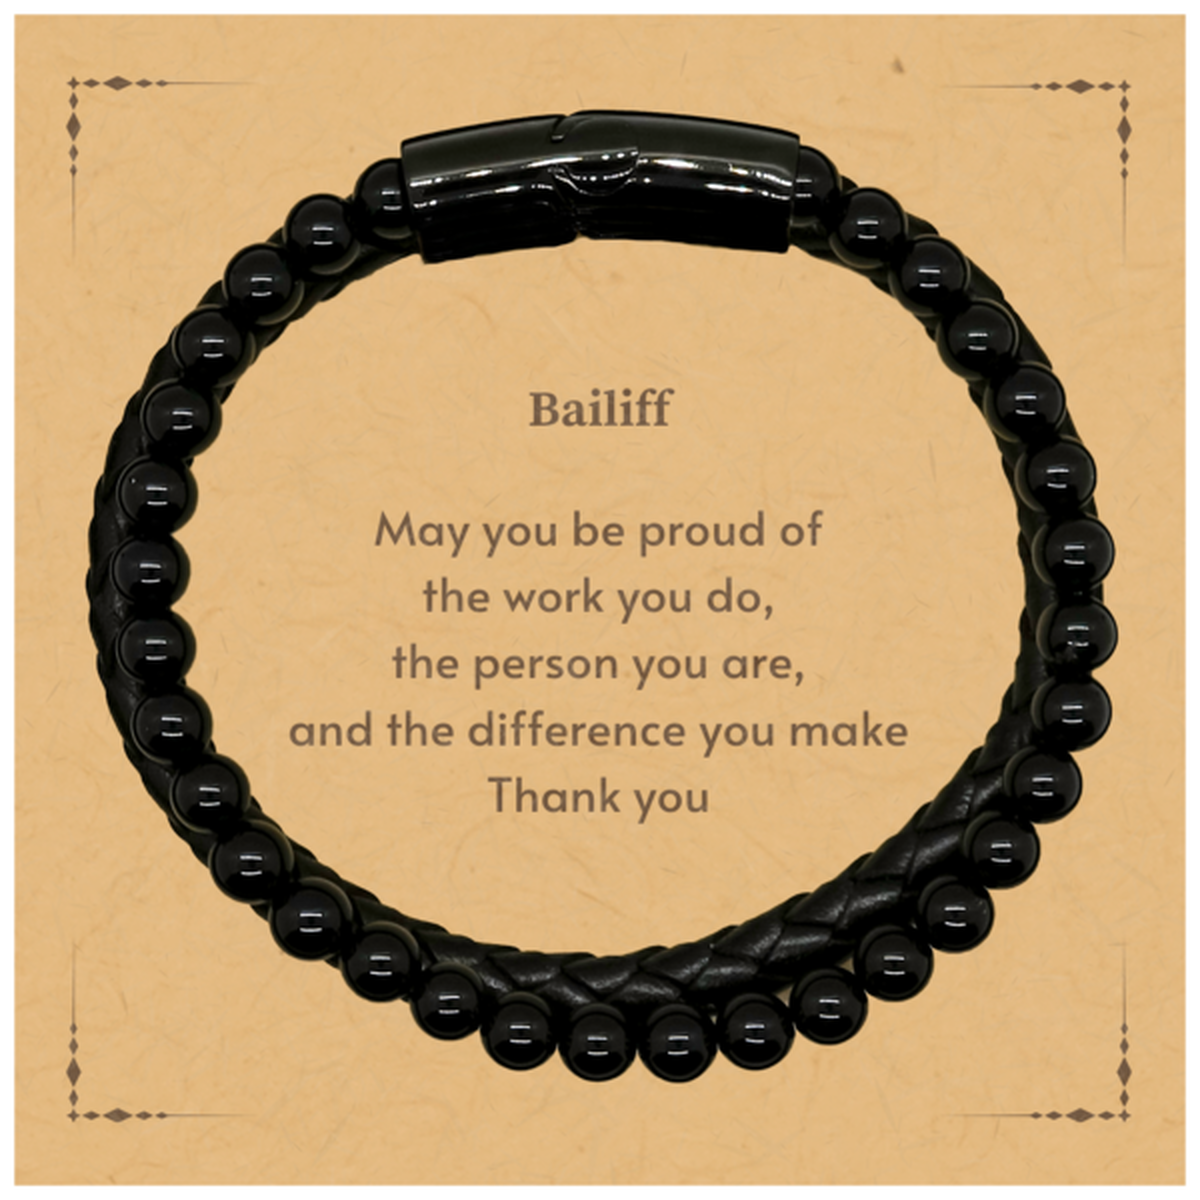 Heartwarming Stone Leather Bracelets Retirement Coworkers Gifts for Bailiff, Bailiff May You be proud of the work you do, the person you are Gifts for Boss Men Women Friends